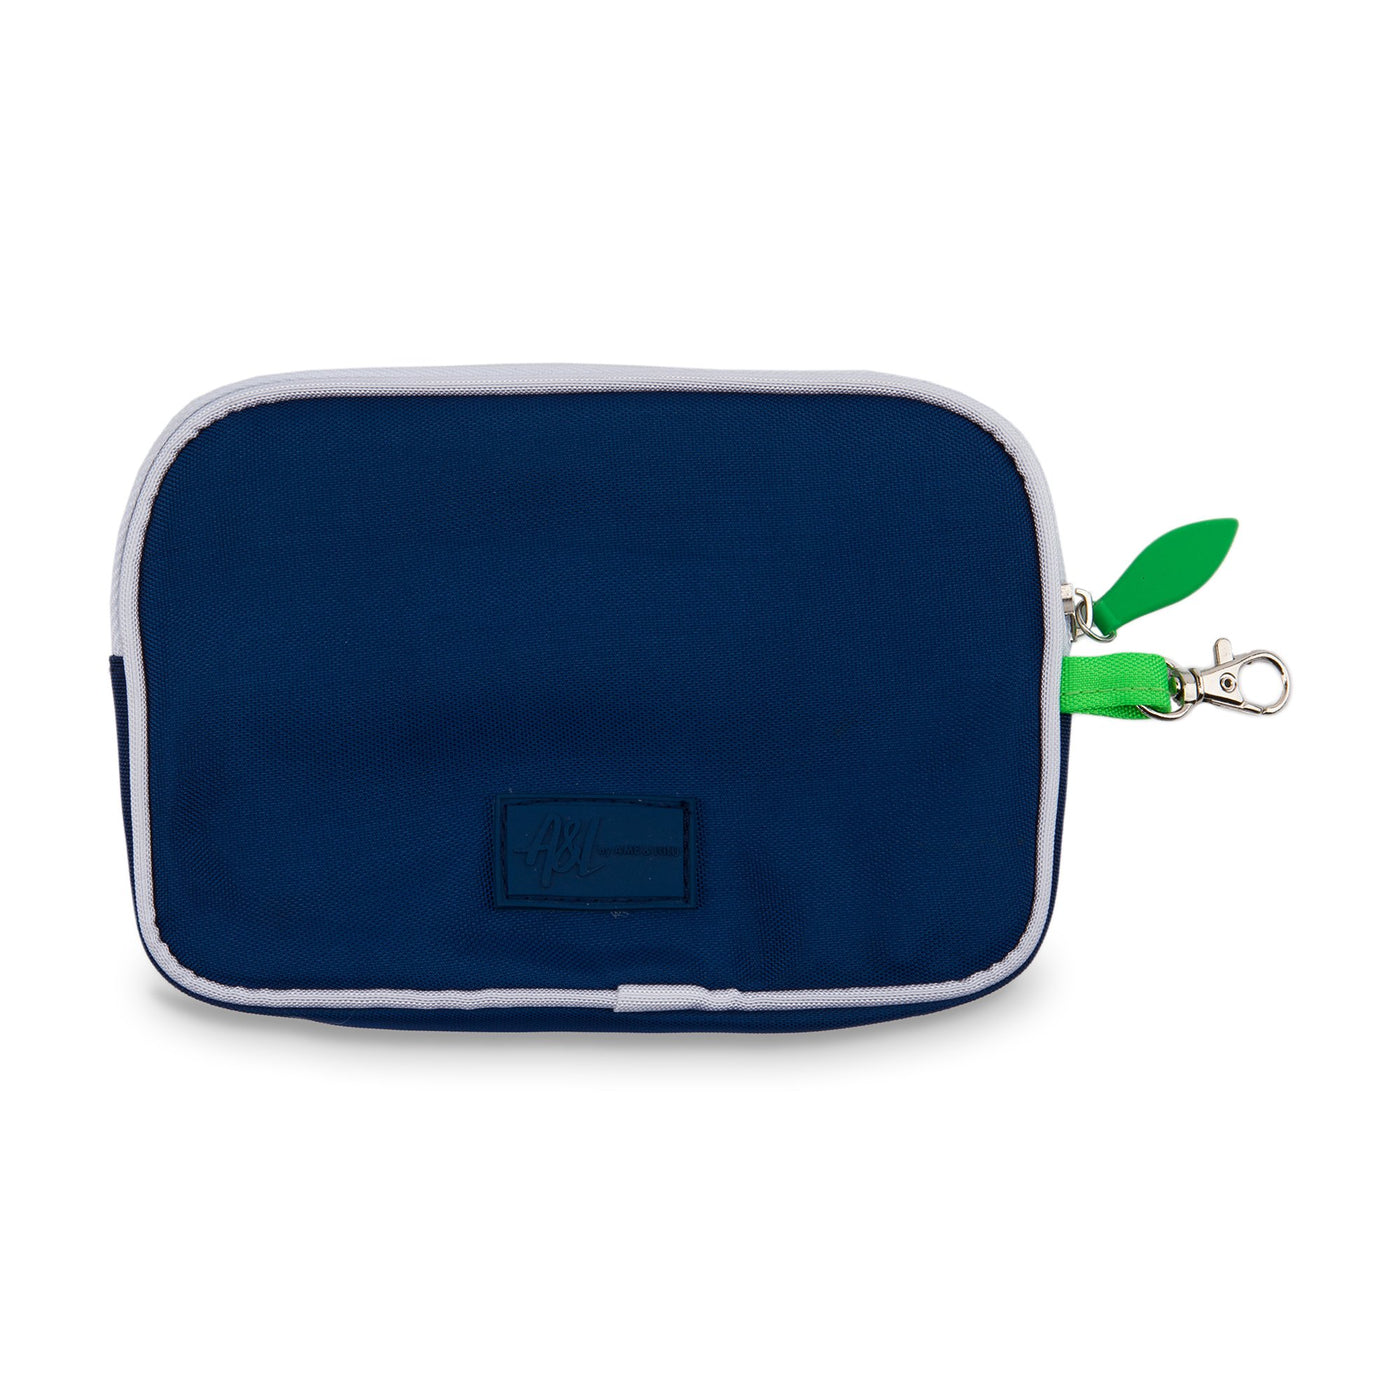 back view of navy rectangular wristlet with green zippers and white trim